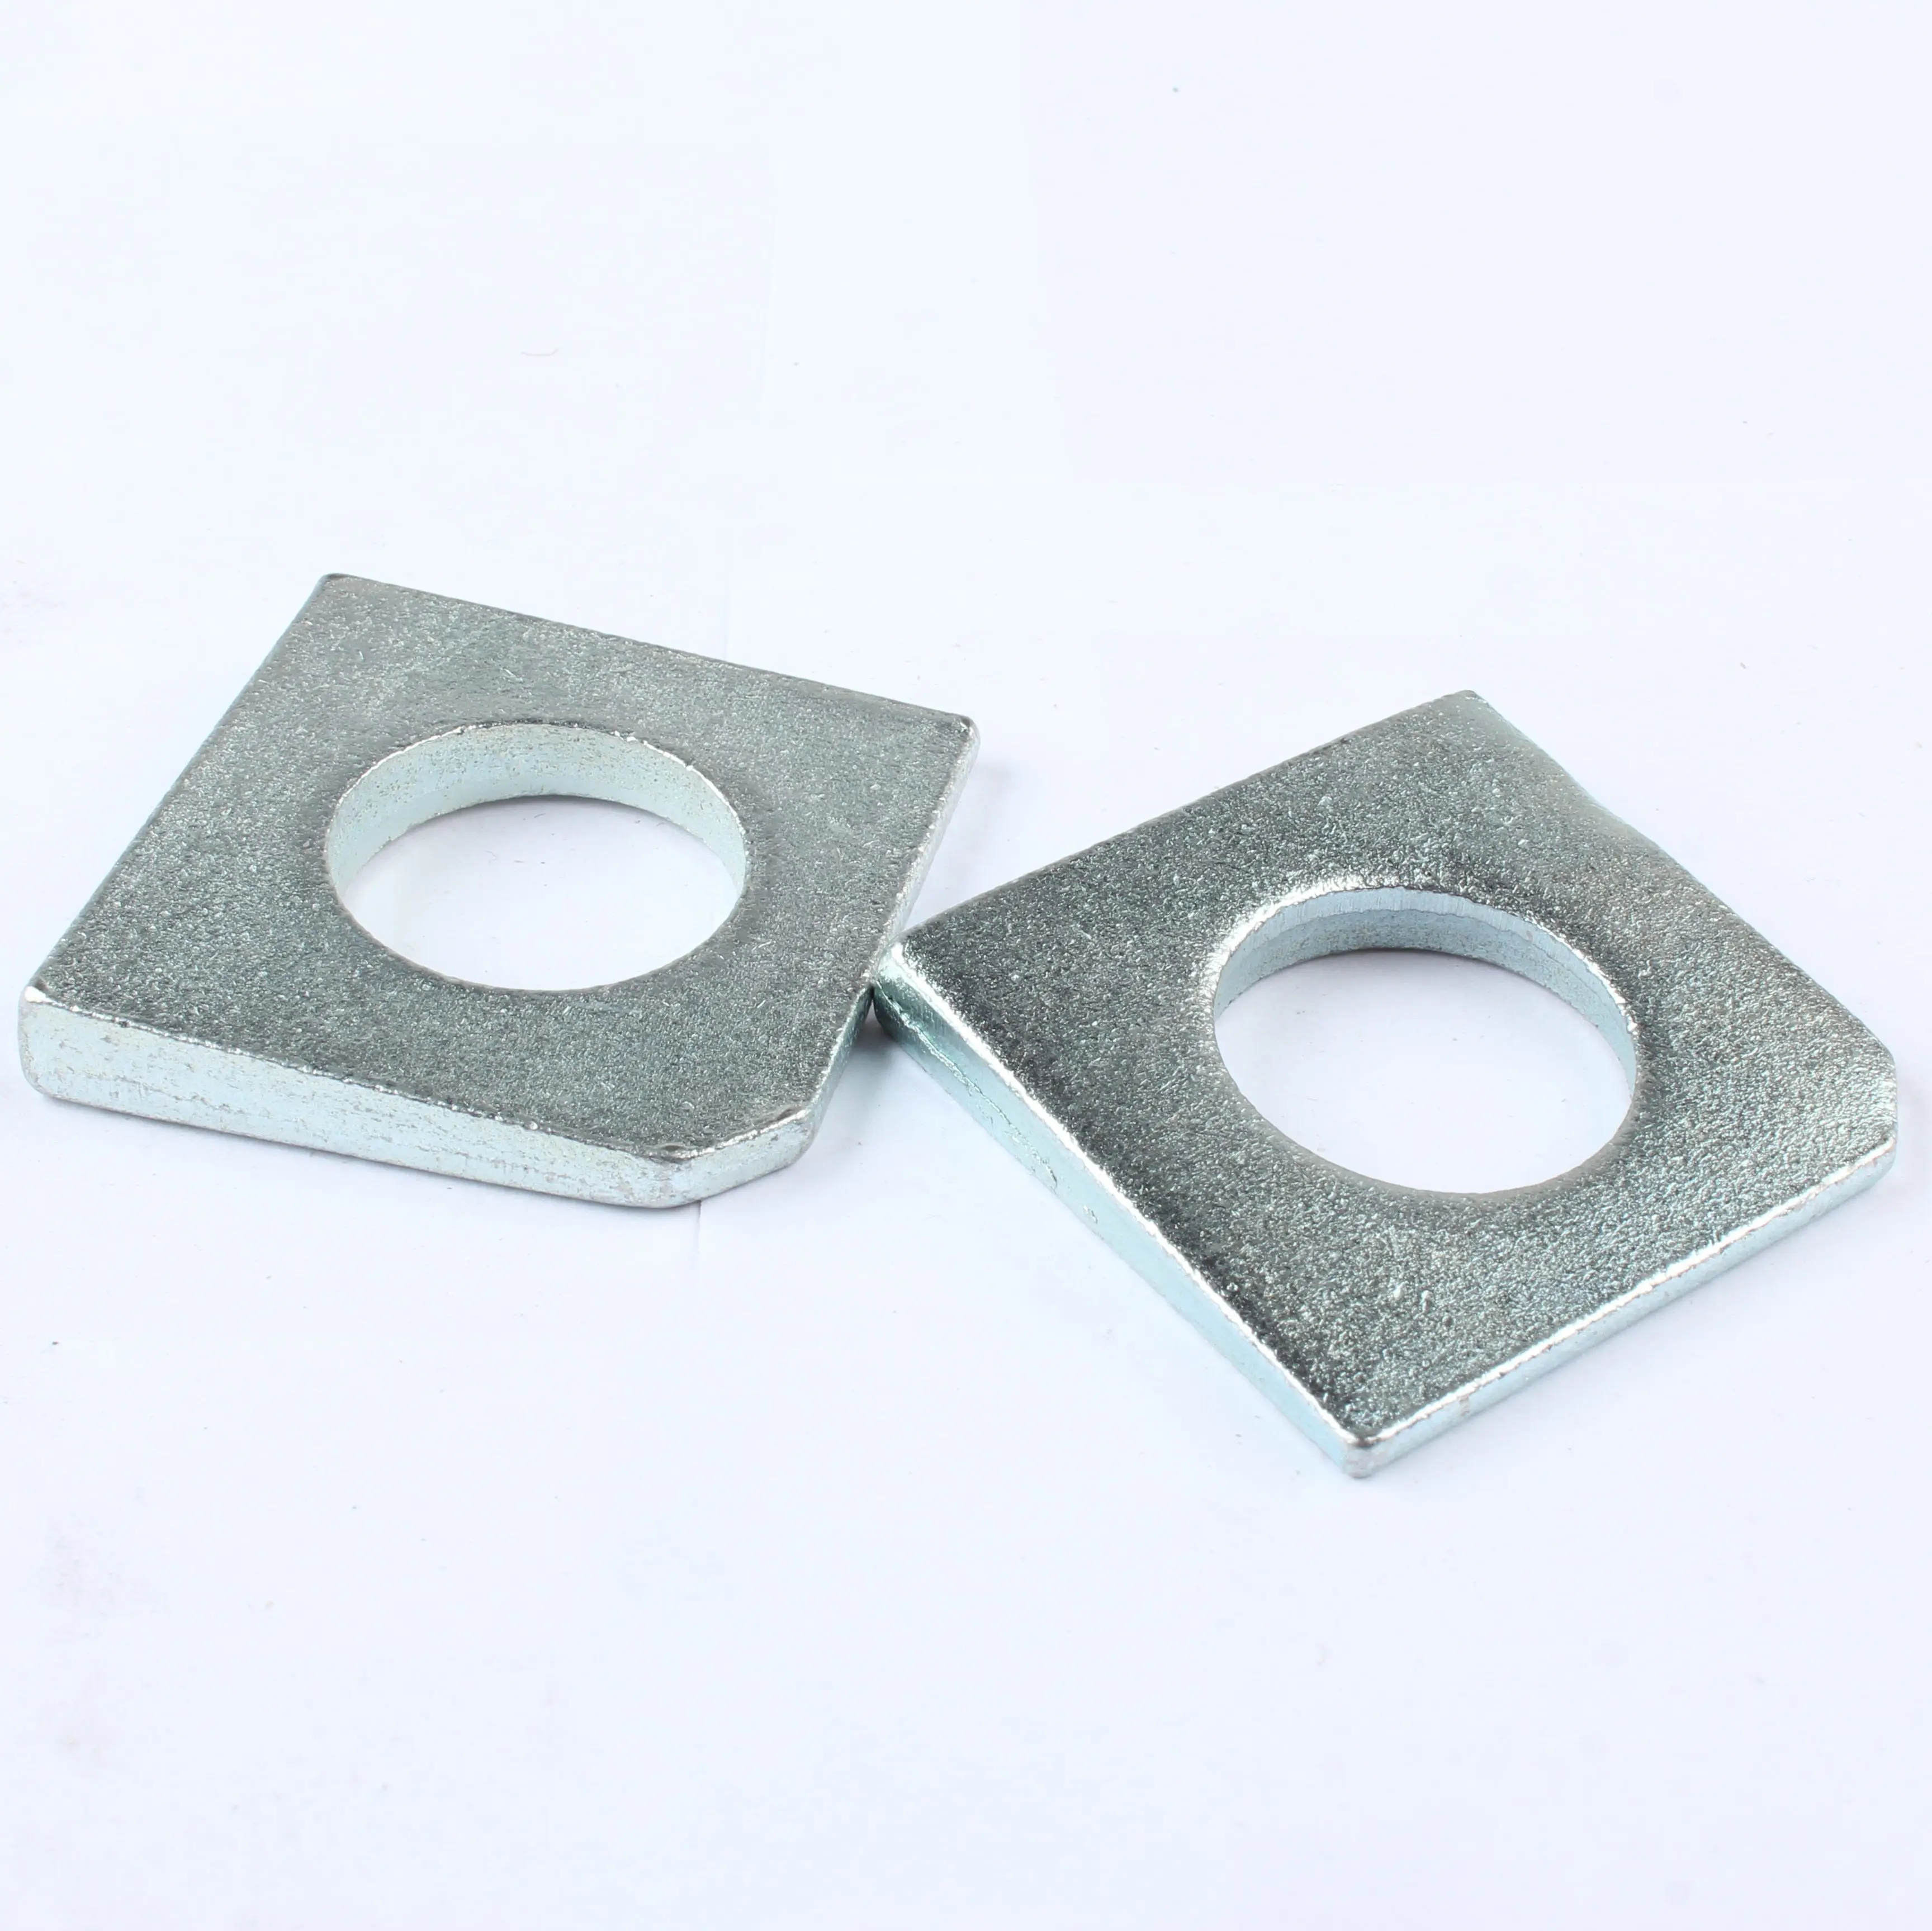 Square Taper Washers For Slot Section GB 853 Stainless Steel 304/316 Metric Size M6-M24